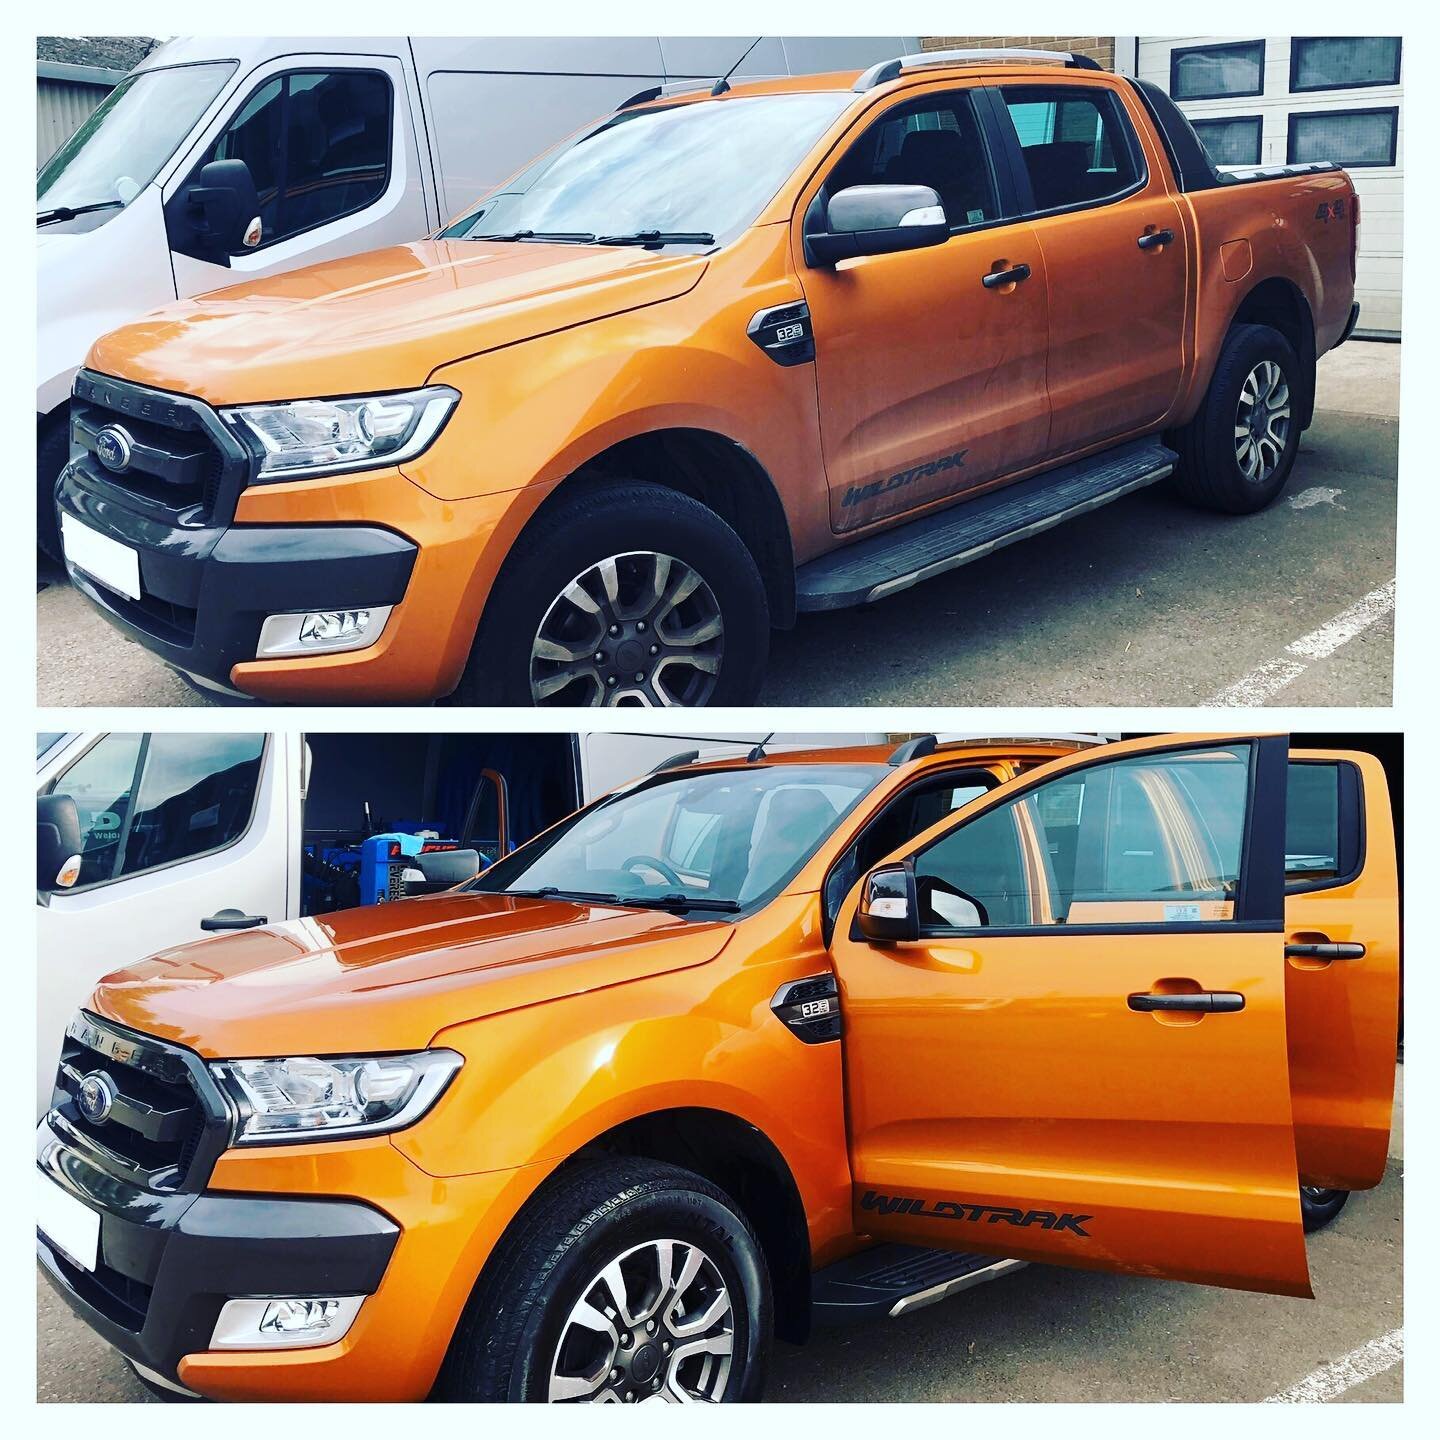 Ford Ranger Wildtrack In for a full interior upholstery deep clean, exterior wash &amp; wax + alloy wheel fallout remover. Ready for a weekend in Cornwall 🌊🏄&zwj;♂️👌🏽